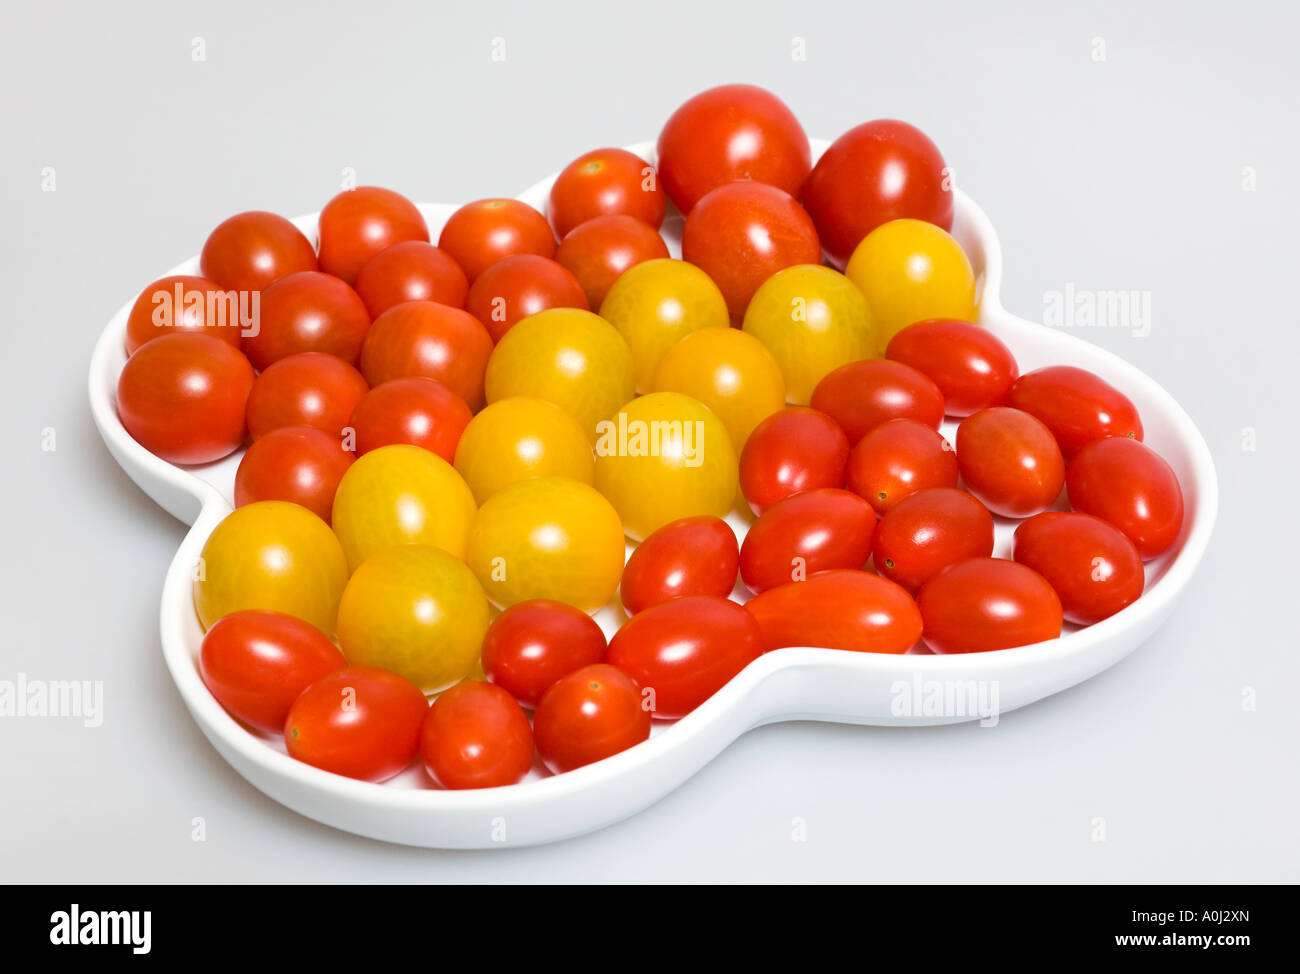 Several small sorts of tomatoes in a porcelain dish Stock Photo